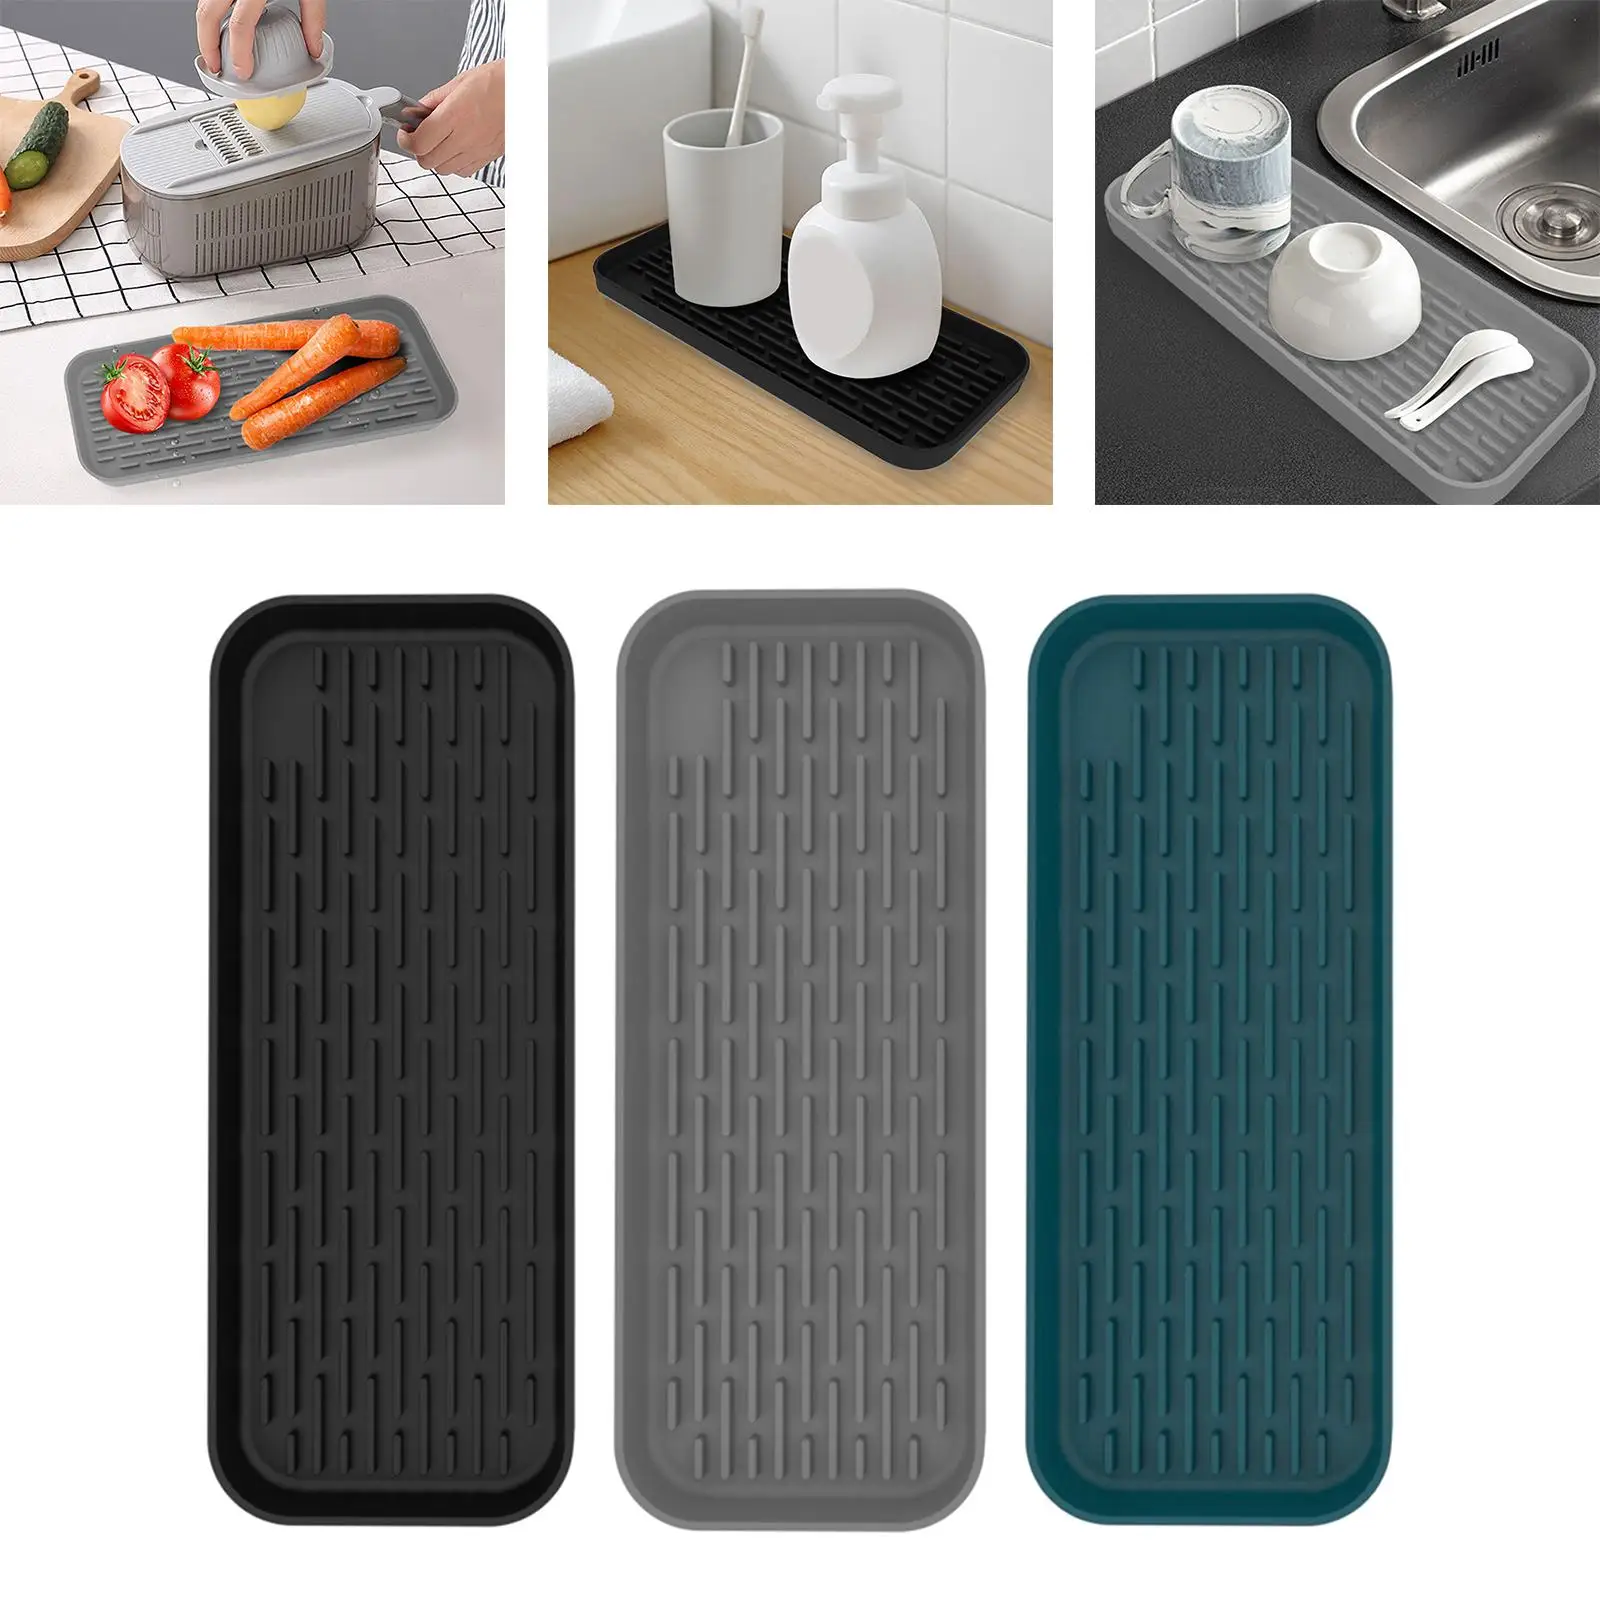 Silicone Tray Waterproof Heat Resistant Non Slip Protector Mats Tableware Organizer Mat Sink Drainer Pad for Kitchen Household